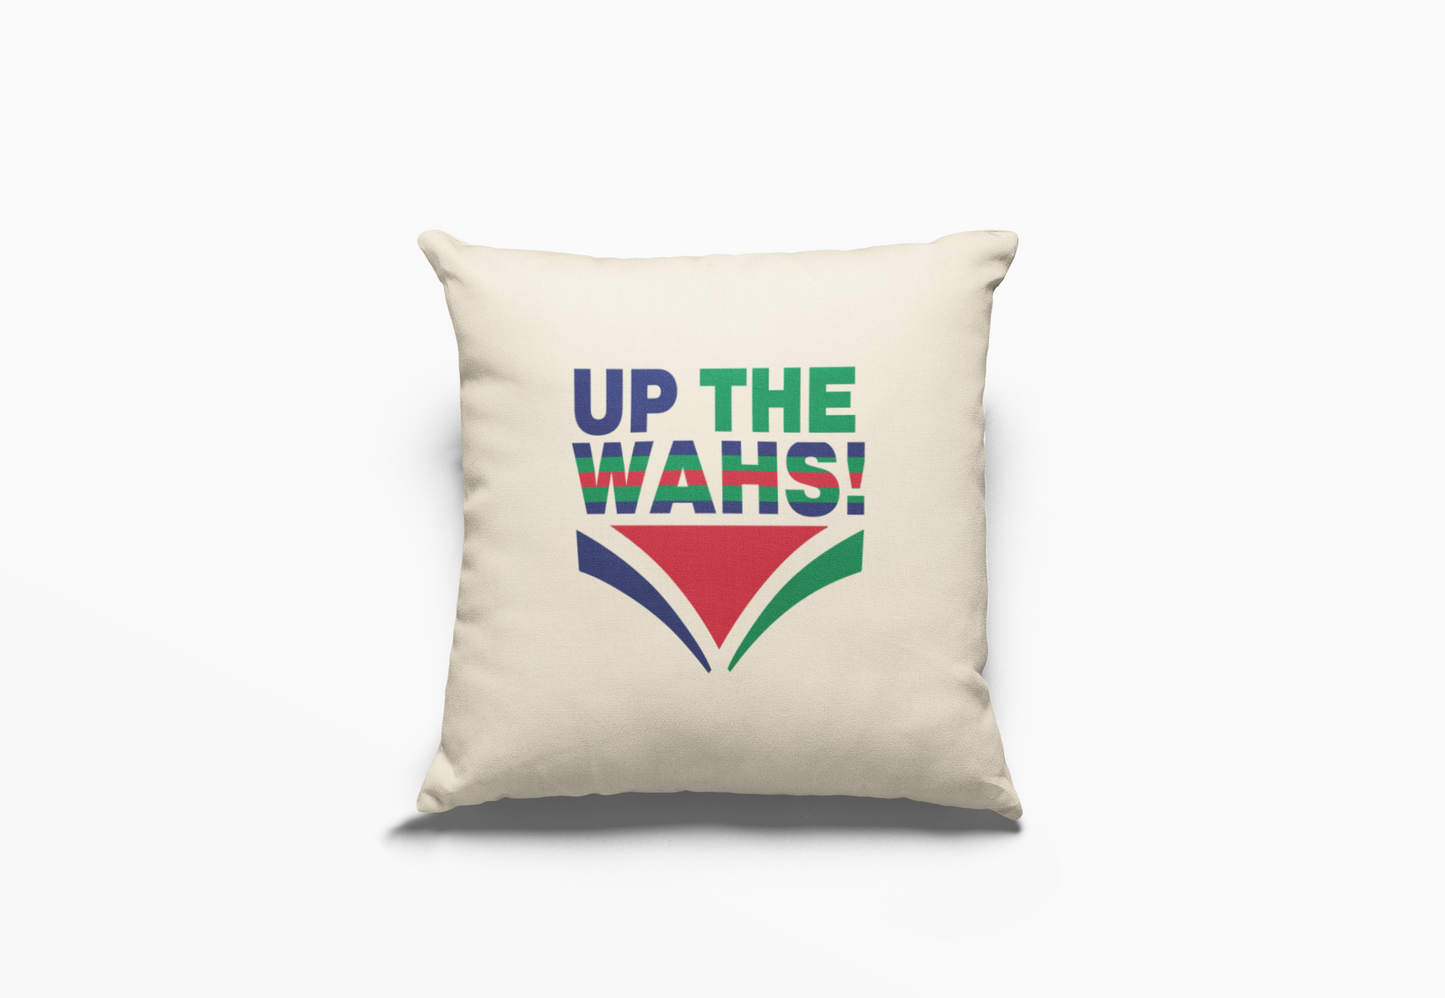 Cushion Cover -UP THE WAHS!